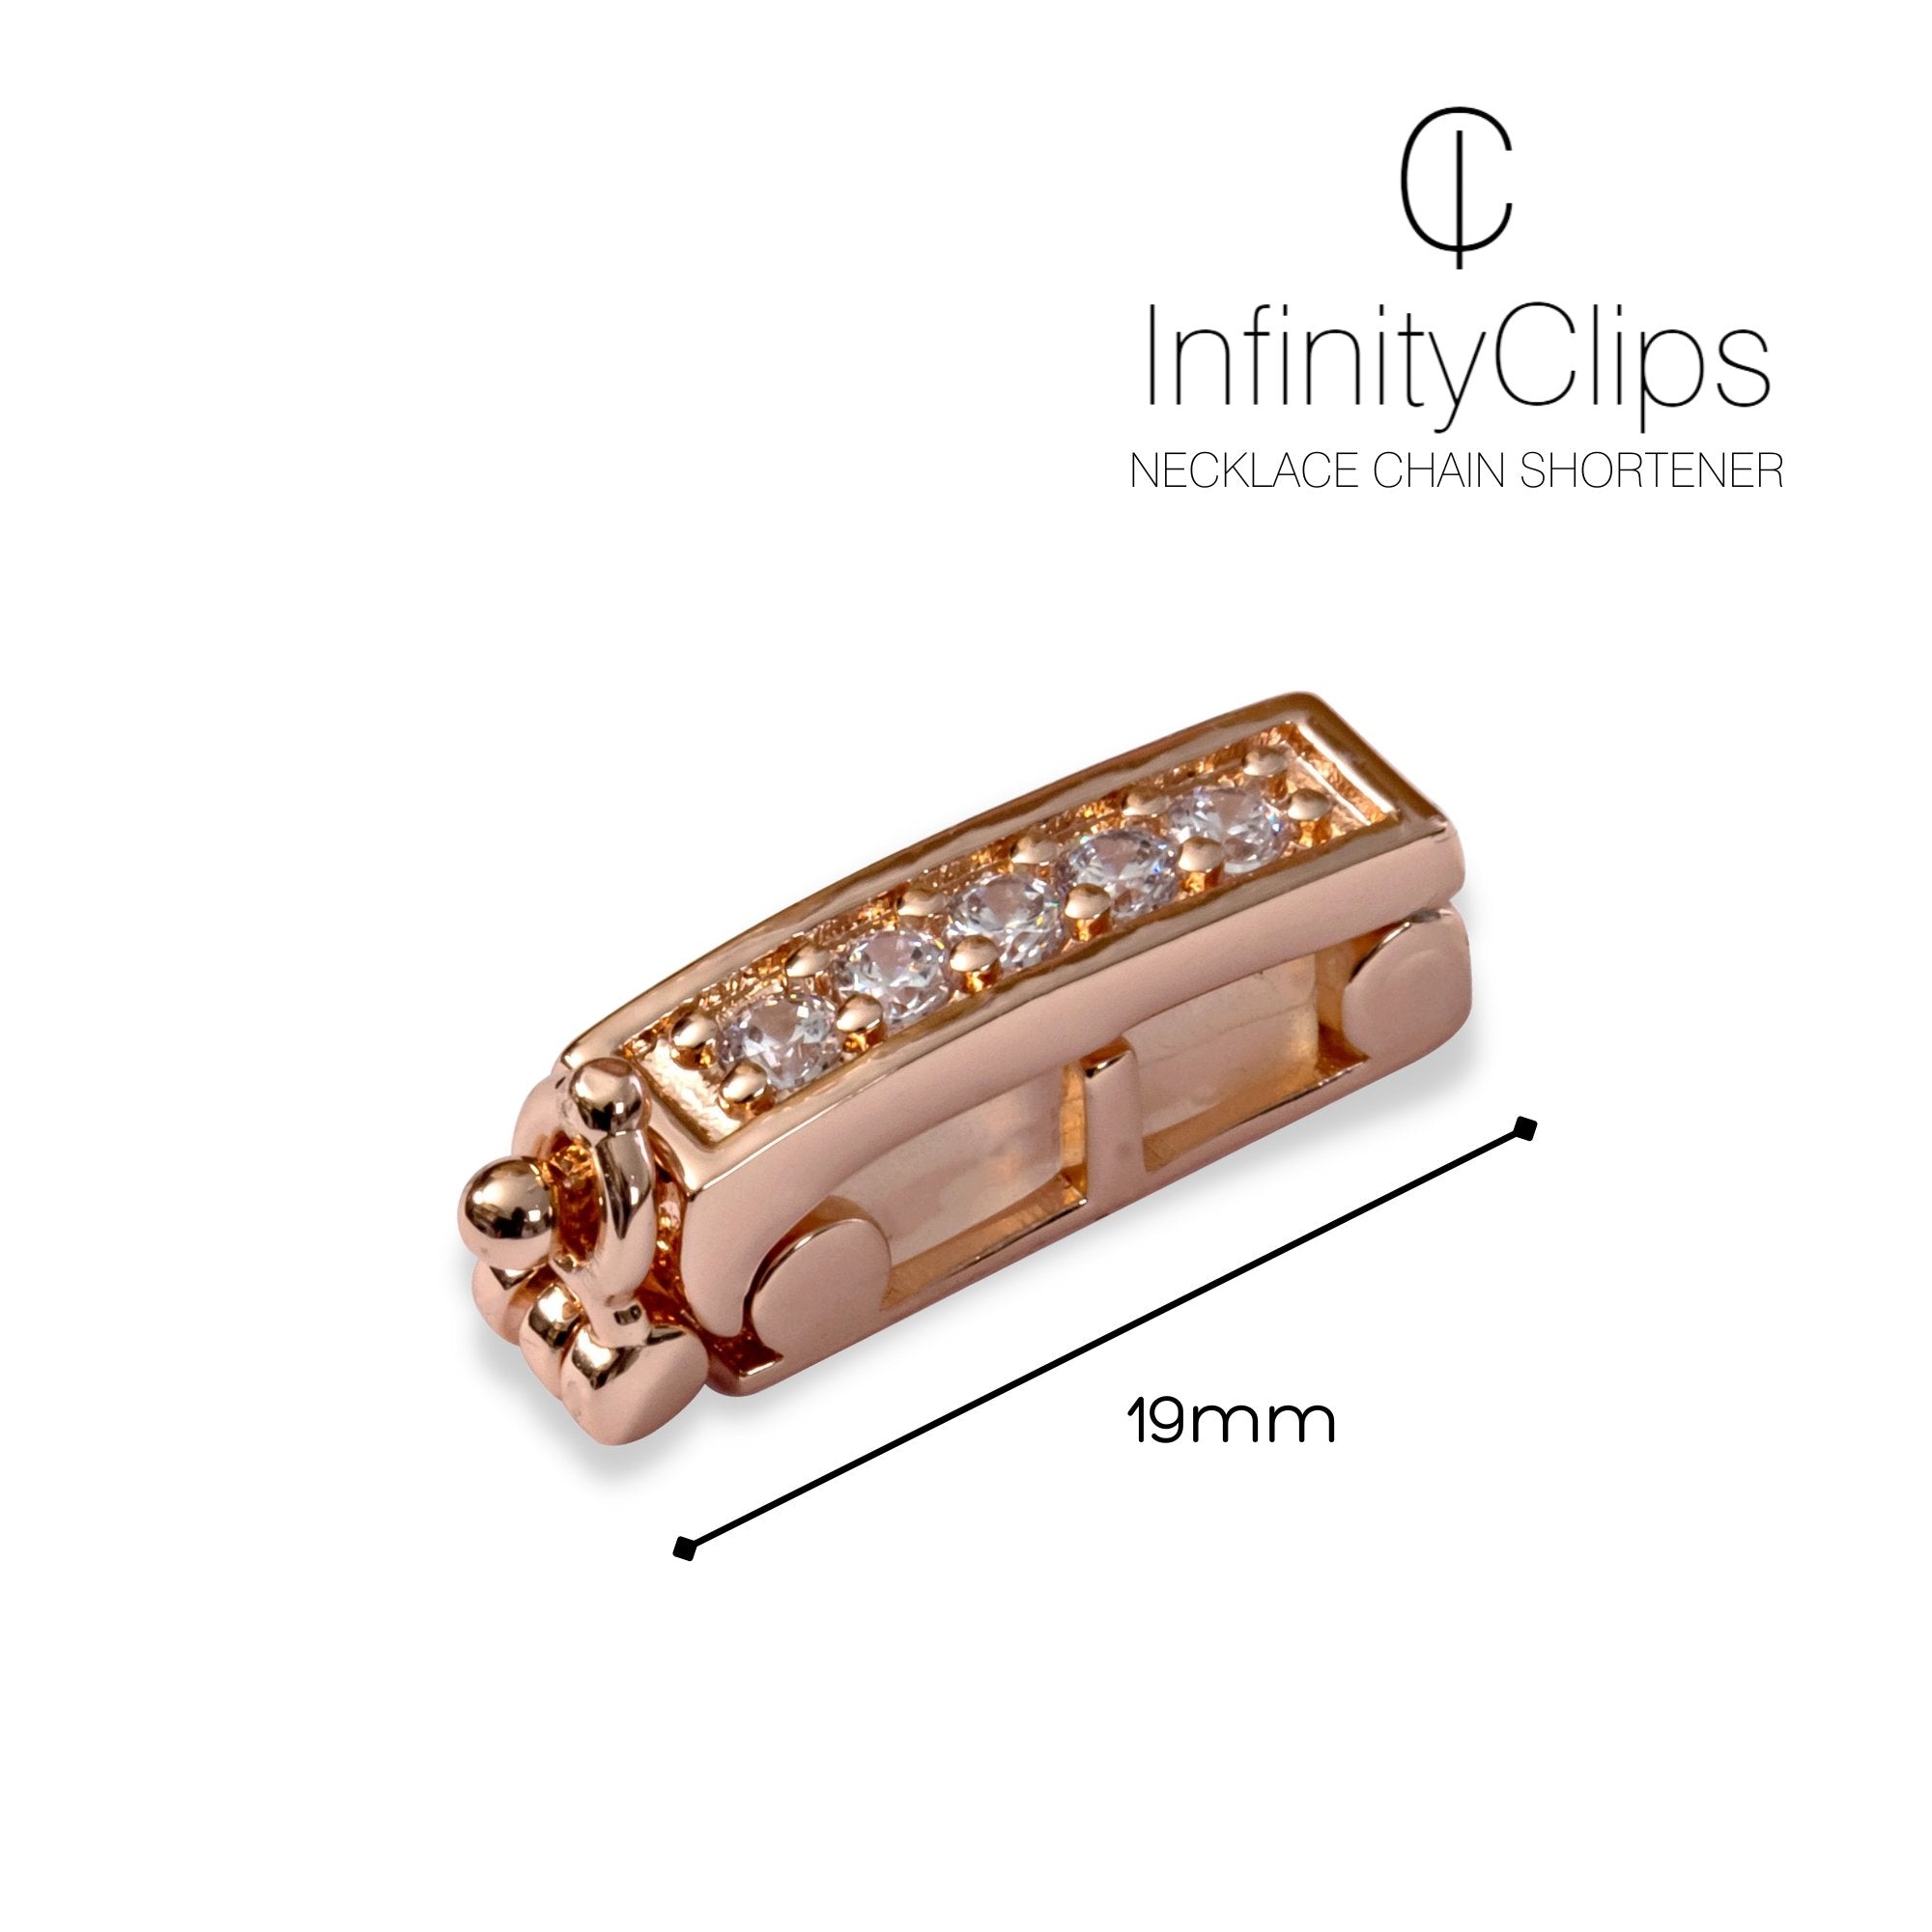 Large Classic Necklace Chain Shortener (Rose Gold) | Infinity Clips